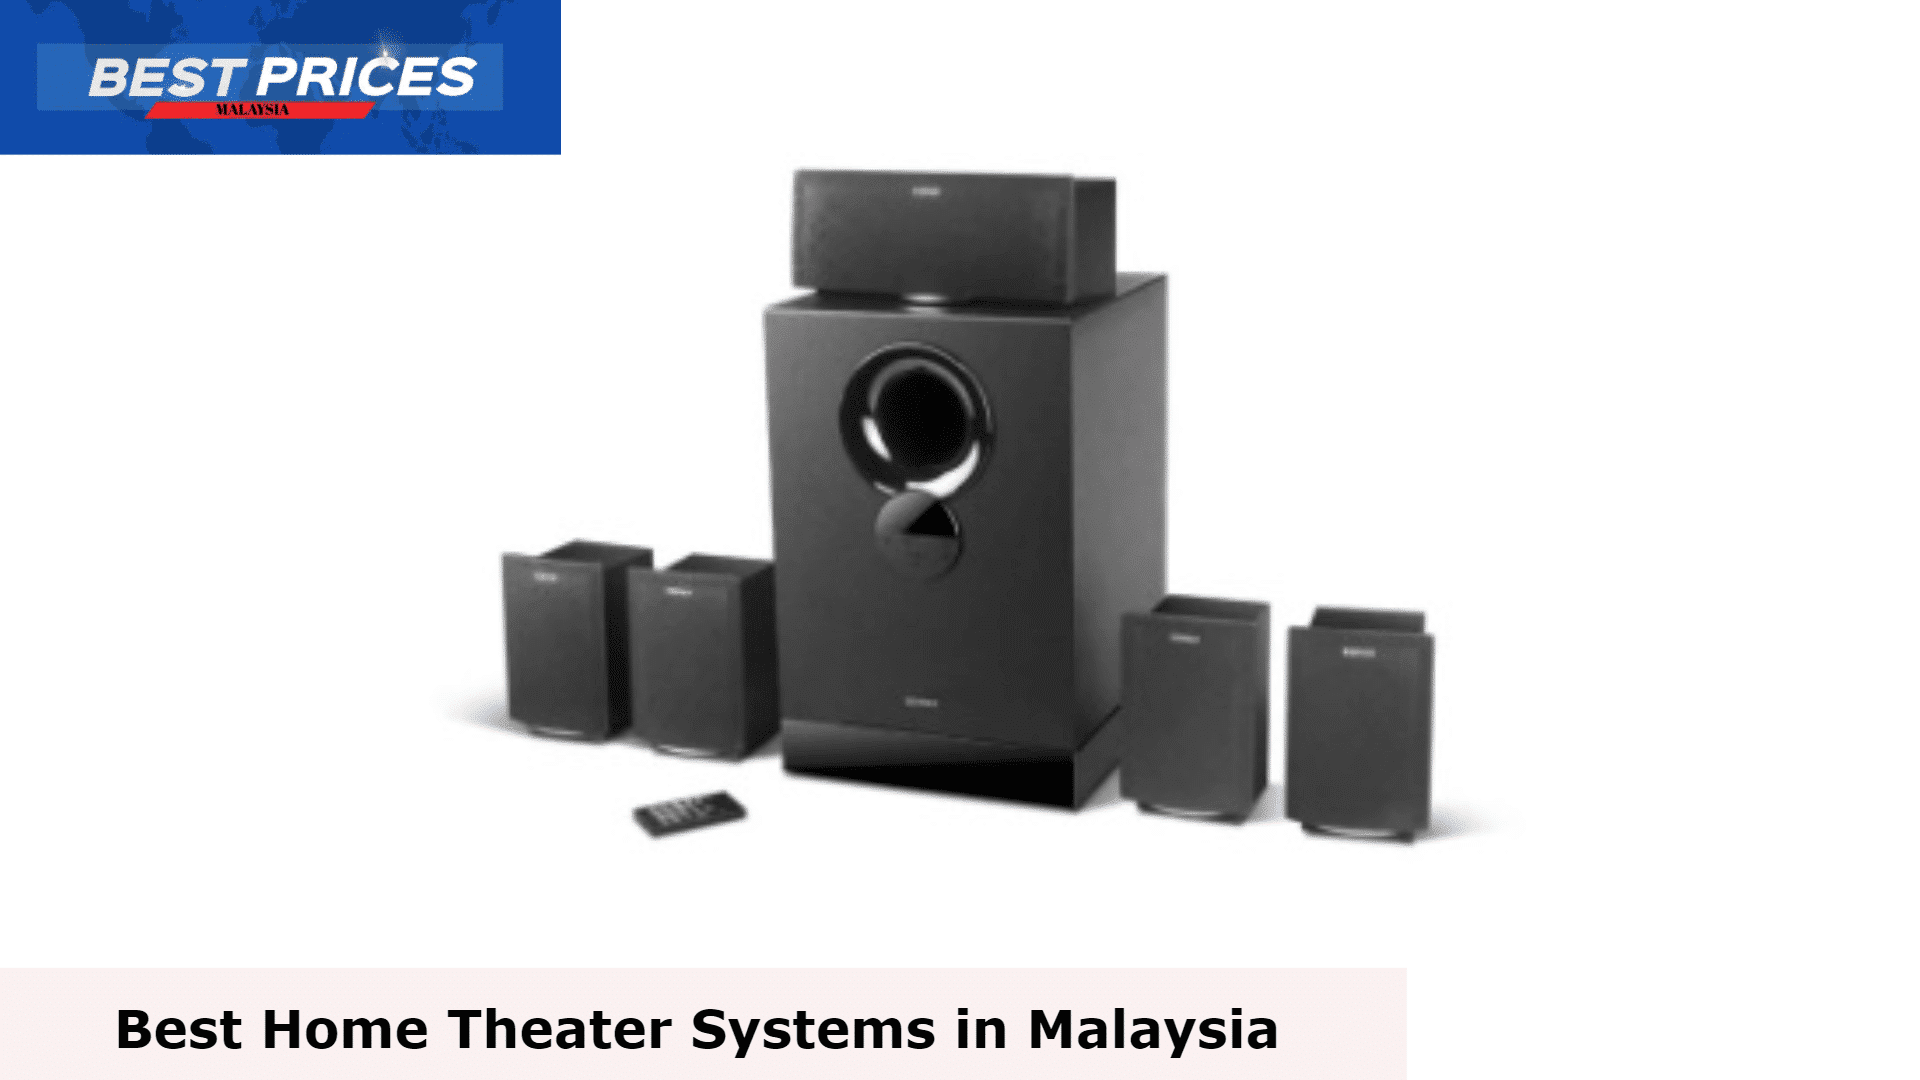 EDIFIER R501BT 5.1 Speaker System - Best Home Theater Systems in Malaysia, Home Theater Systems Malaysia, Which is the best home theater system in Malaysia?, What is the difference between a home theater system and surround sound?, Are home theaters worth it?, What is difference between soundbar and home Theatre?, What is difference between soundbar and home Theatre?, Best home theatre speaker systems, Is soundbar or 5.1 better?, Which is better soundbar or subwoofer?, Which home theater brand is best for home?
Which 5.1 speaker system is best?, What are the top 10 surround sound systems?, What is the highest quality sound system?,